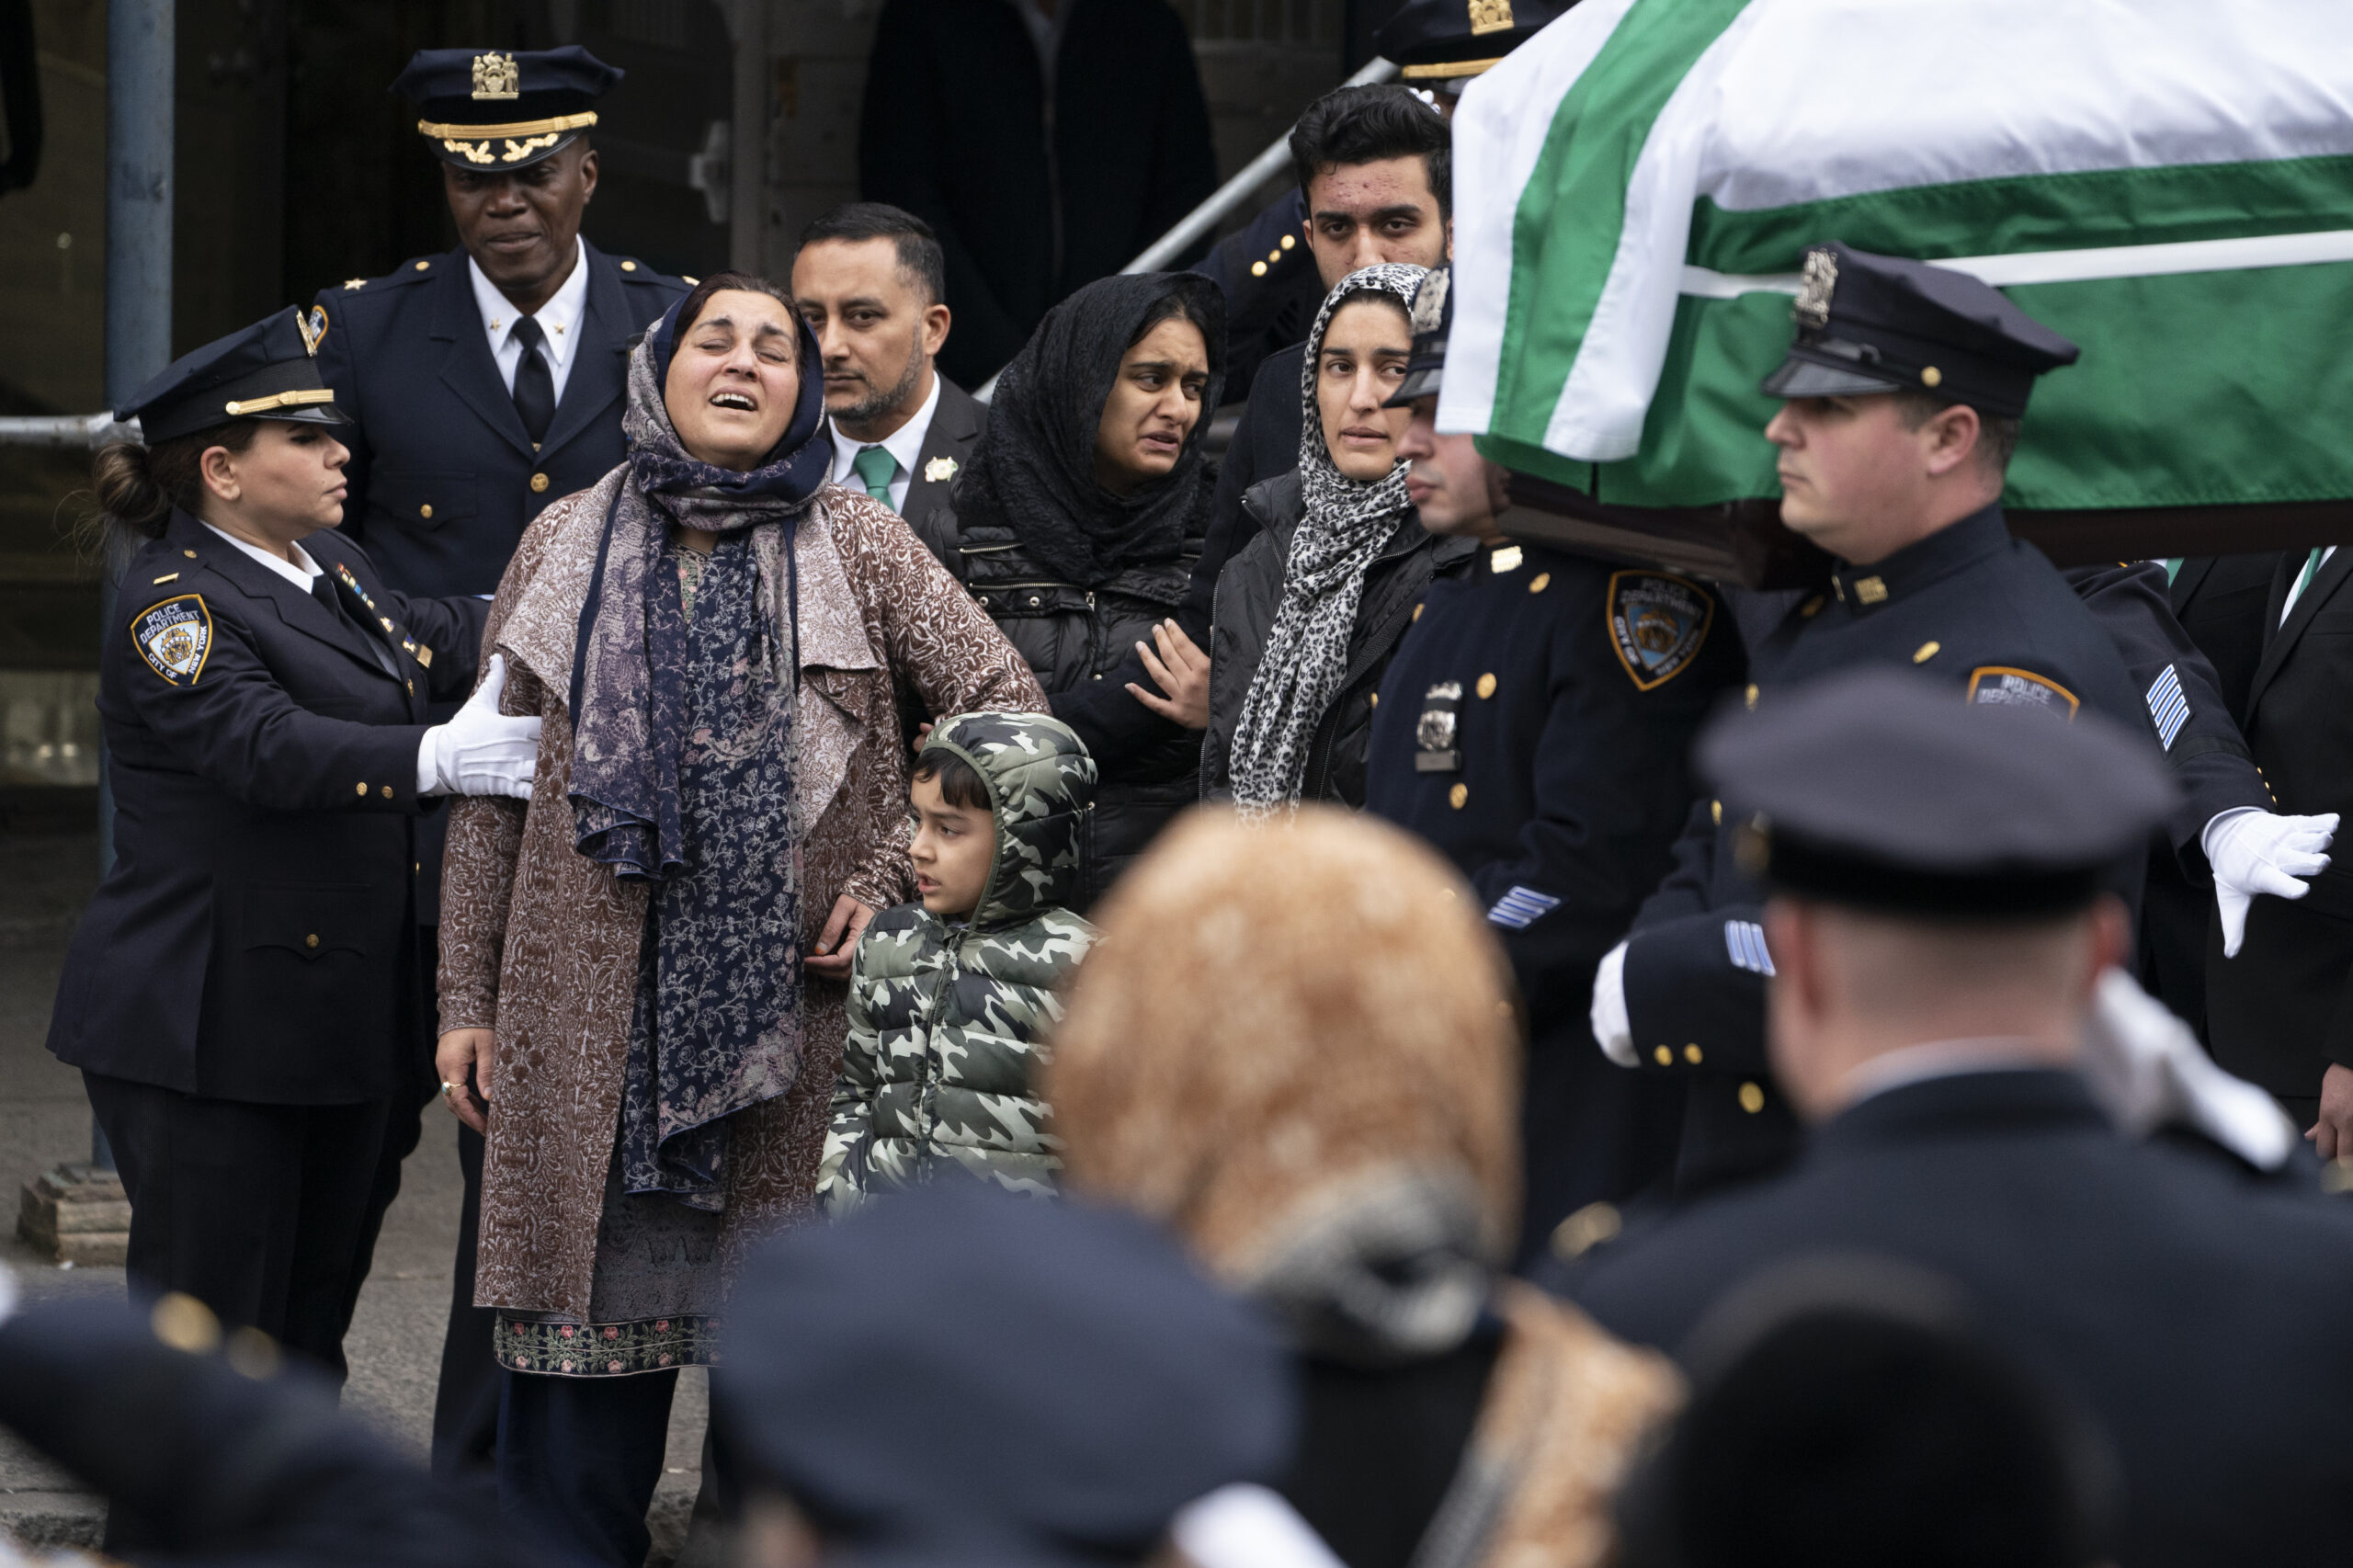 Friends, family, and fellow officers gathered at the Makki Masjid Muslim Community Center for the final farewell of NYPD officer Adeed Fayaz, who died after being shot dead in a Facebook marketplace robbery.